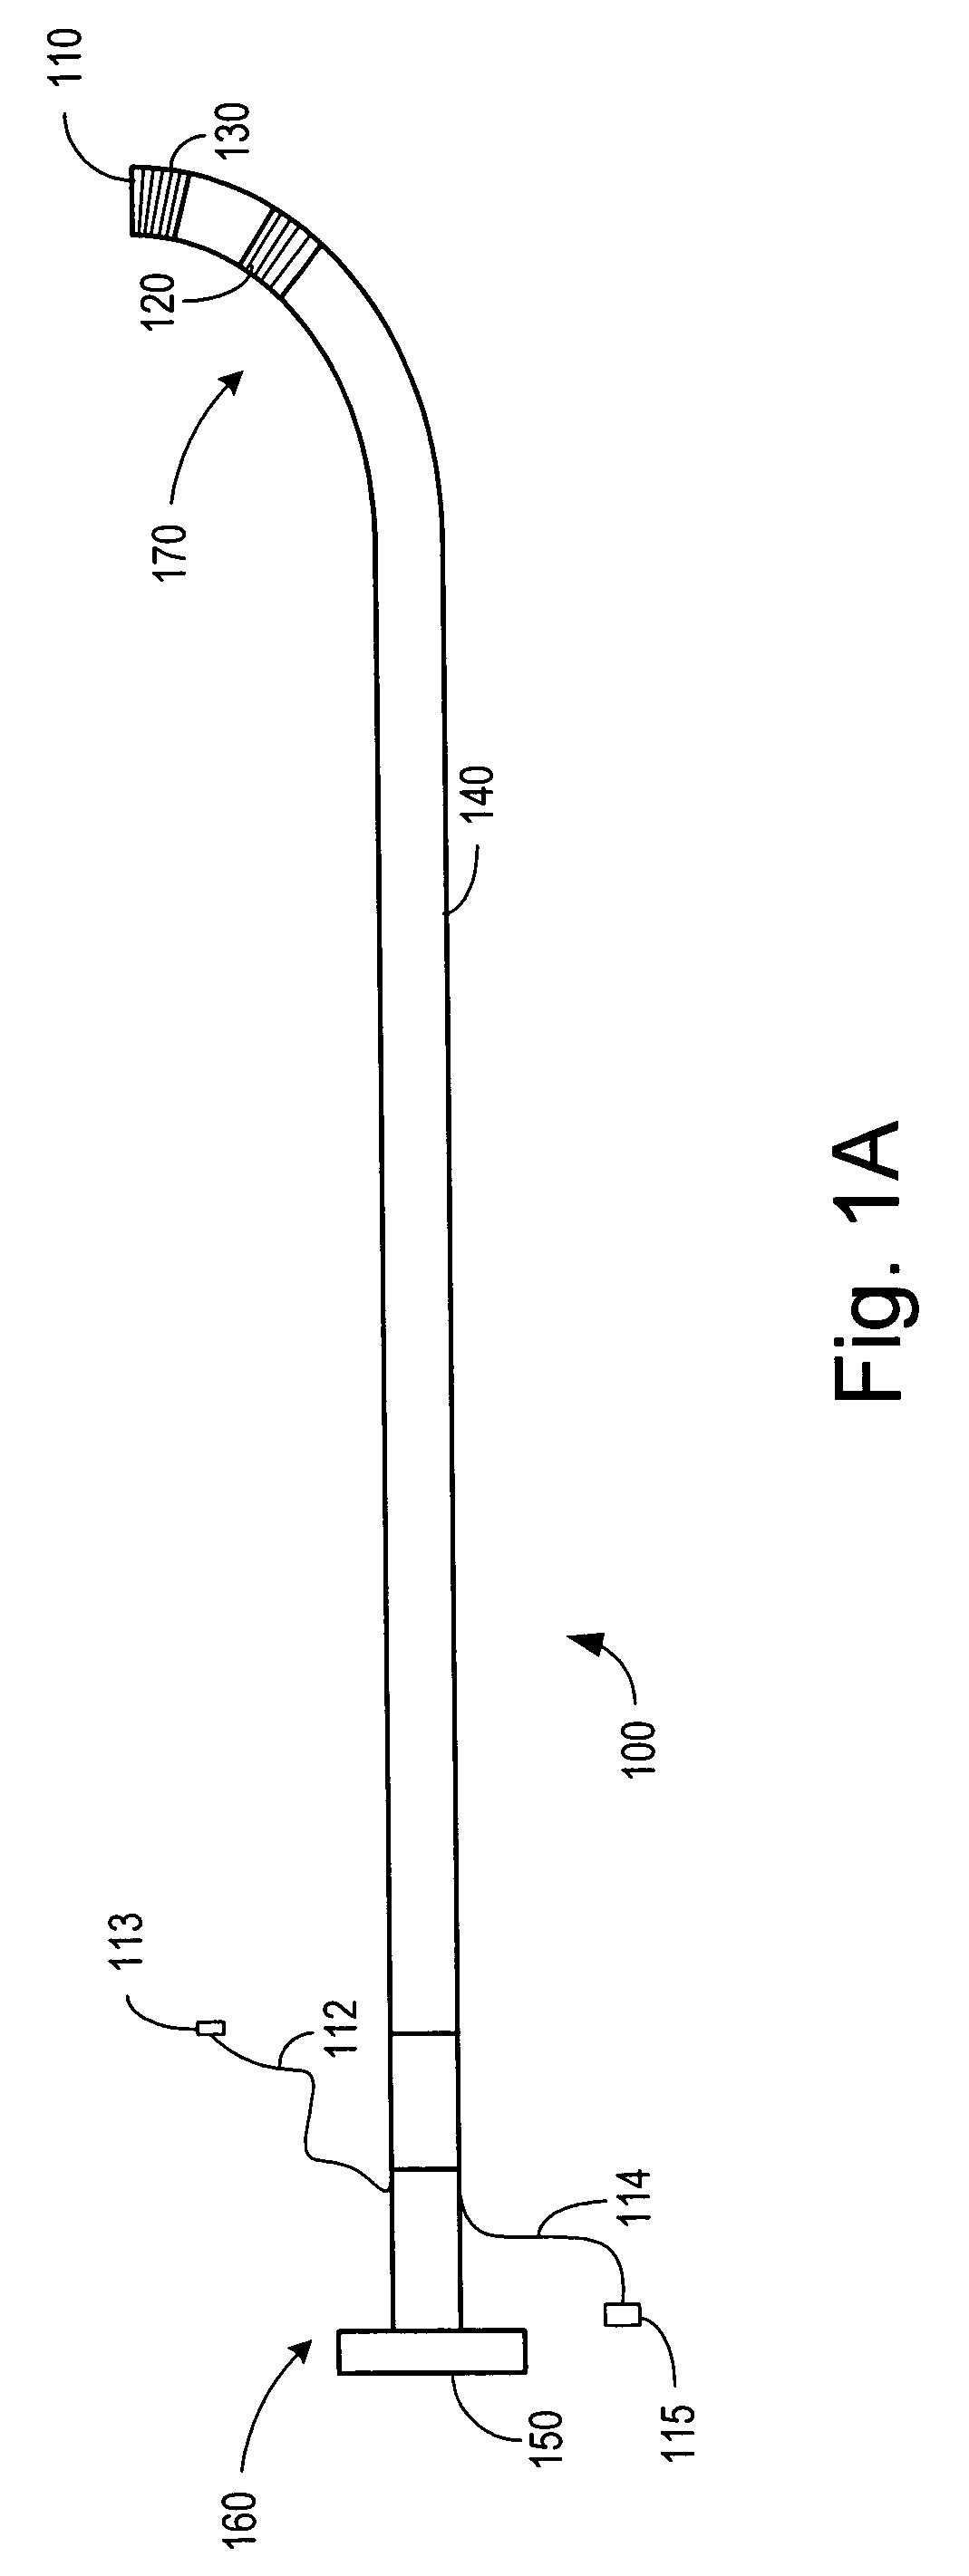 Catheter lead placement system and method